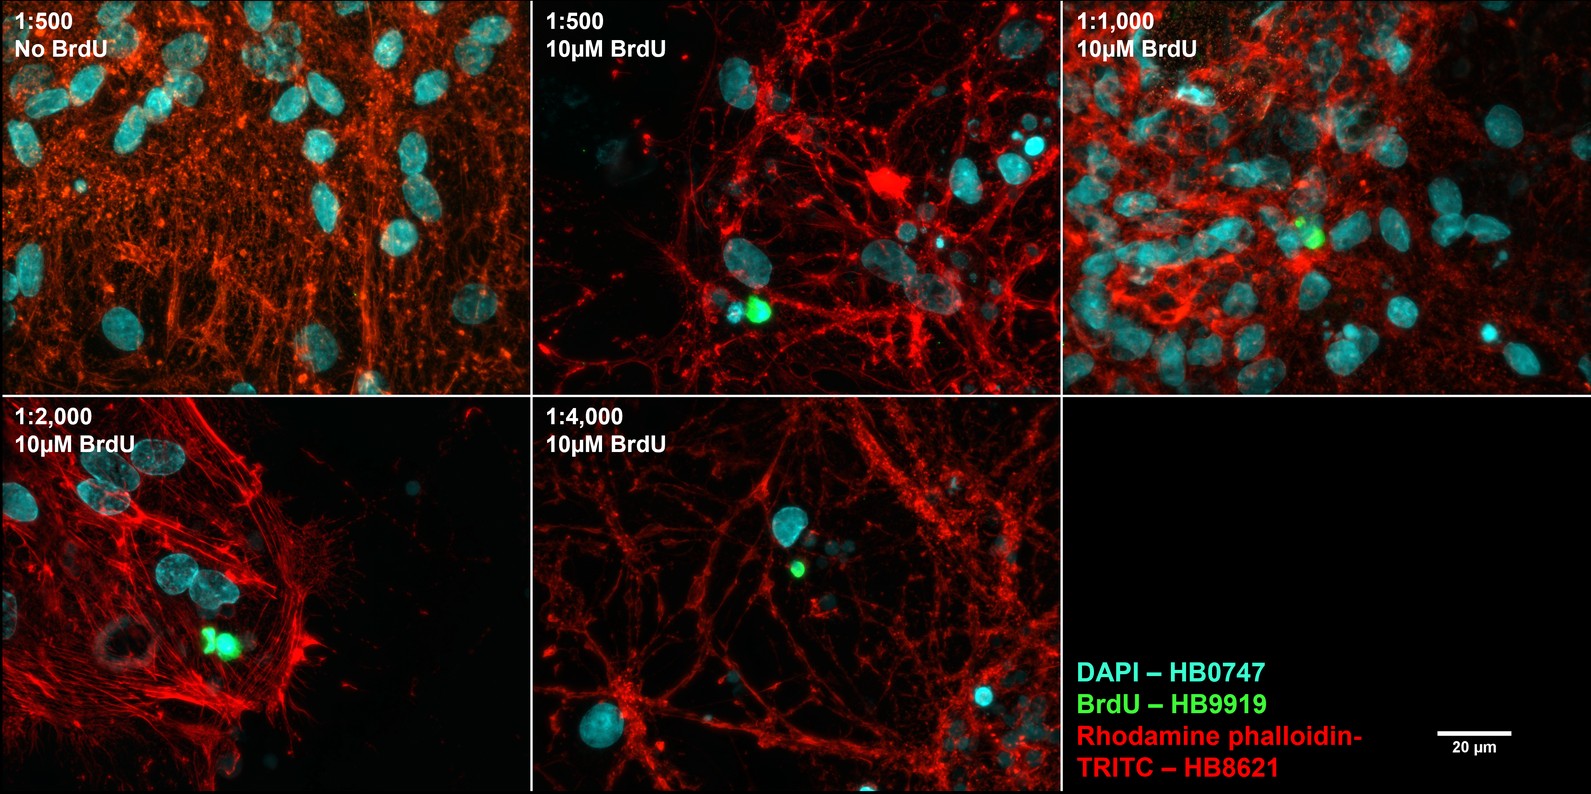 Figure 6. Concentration response of HB9919 staining in mixed neuronal cultures.